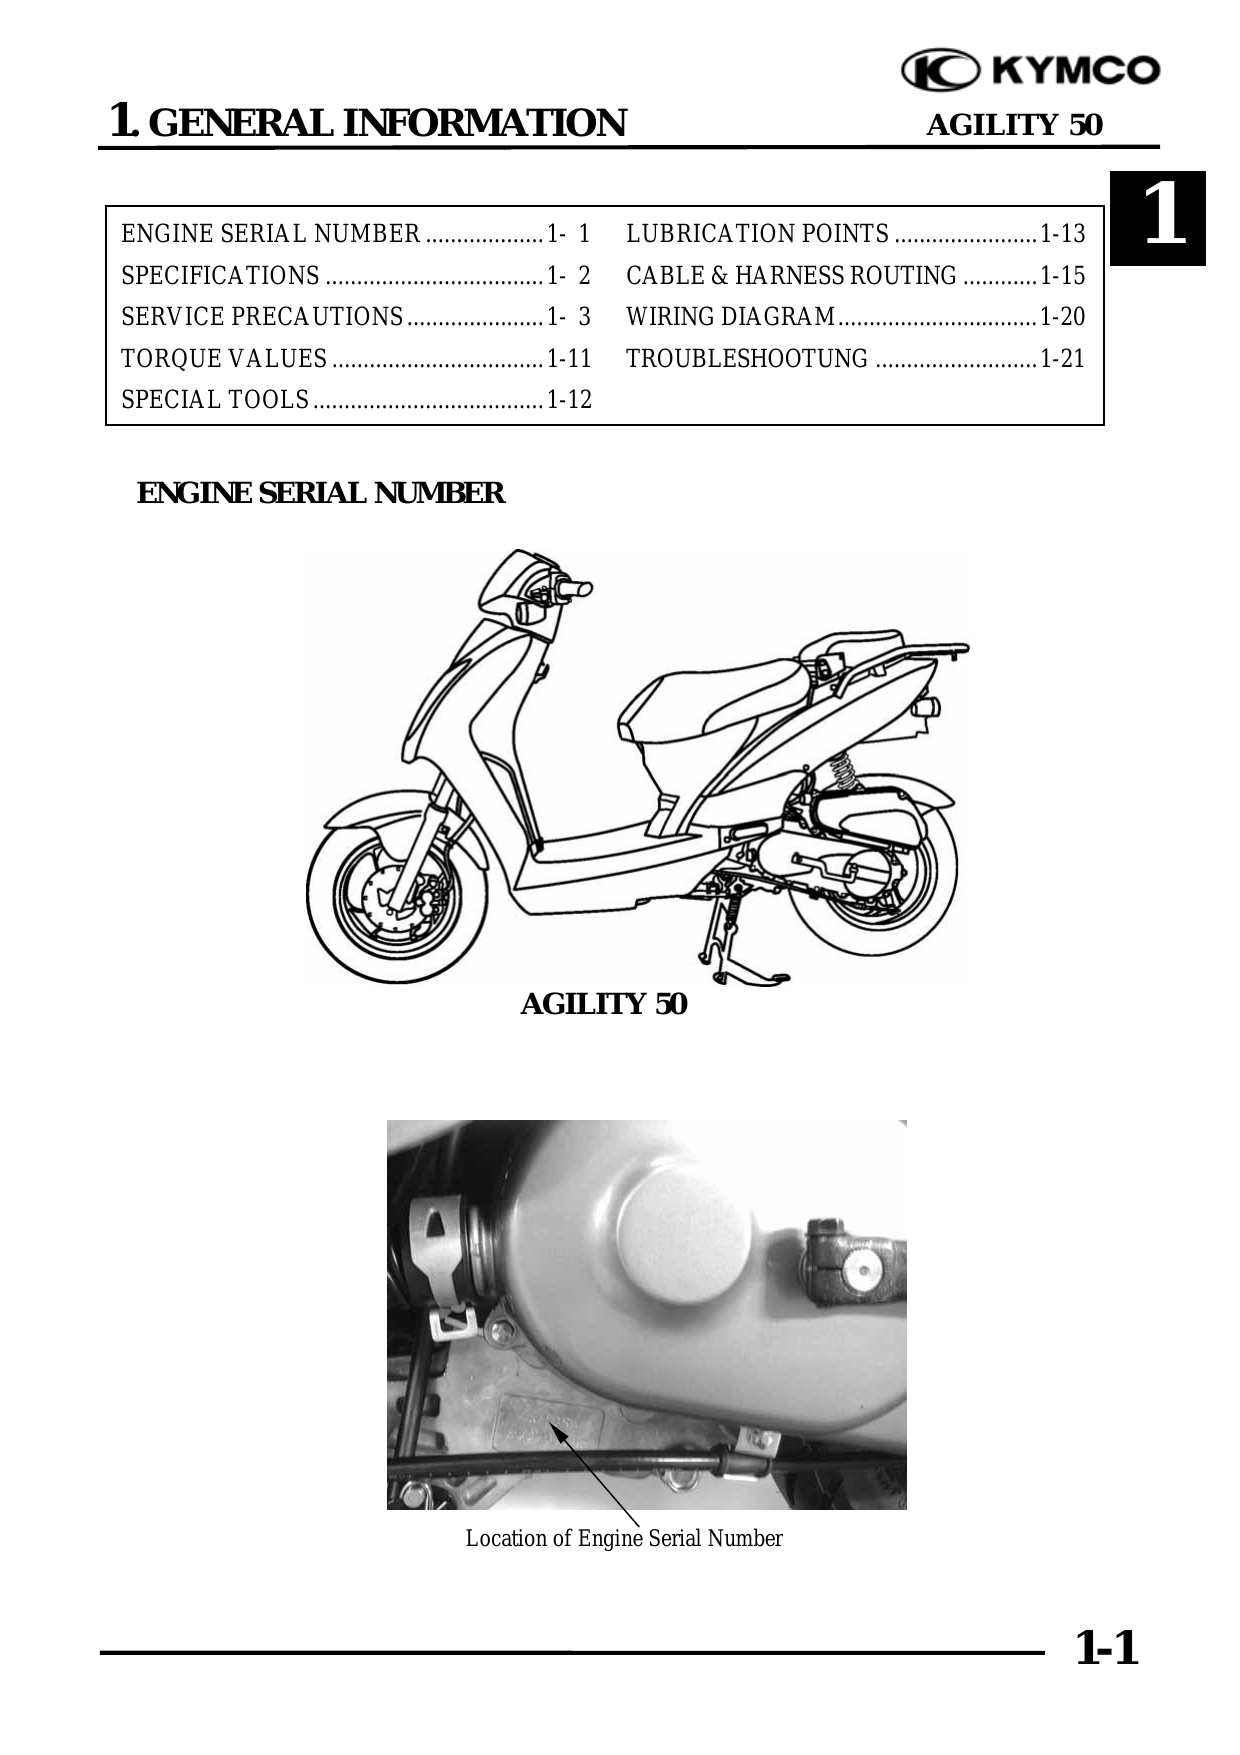 Kymco Agility 50 scooter service manual Preview image 2